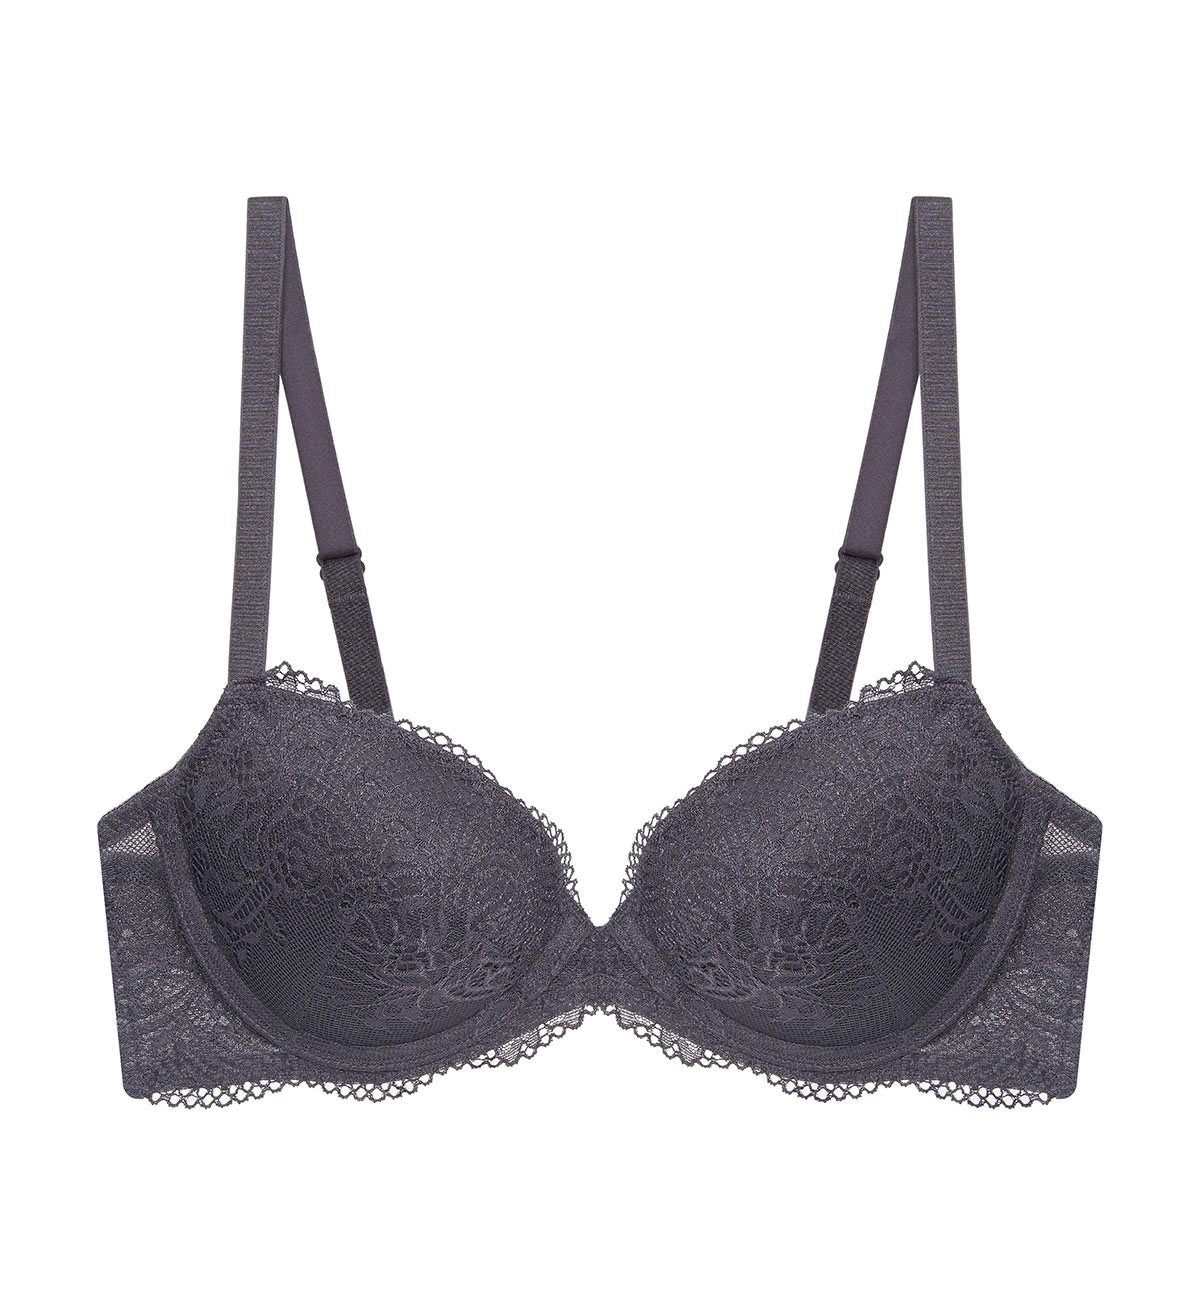 Simply Style Larkspur Wired Push Up Bra in Grey Combination | Triumph ...